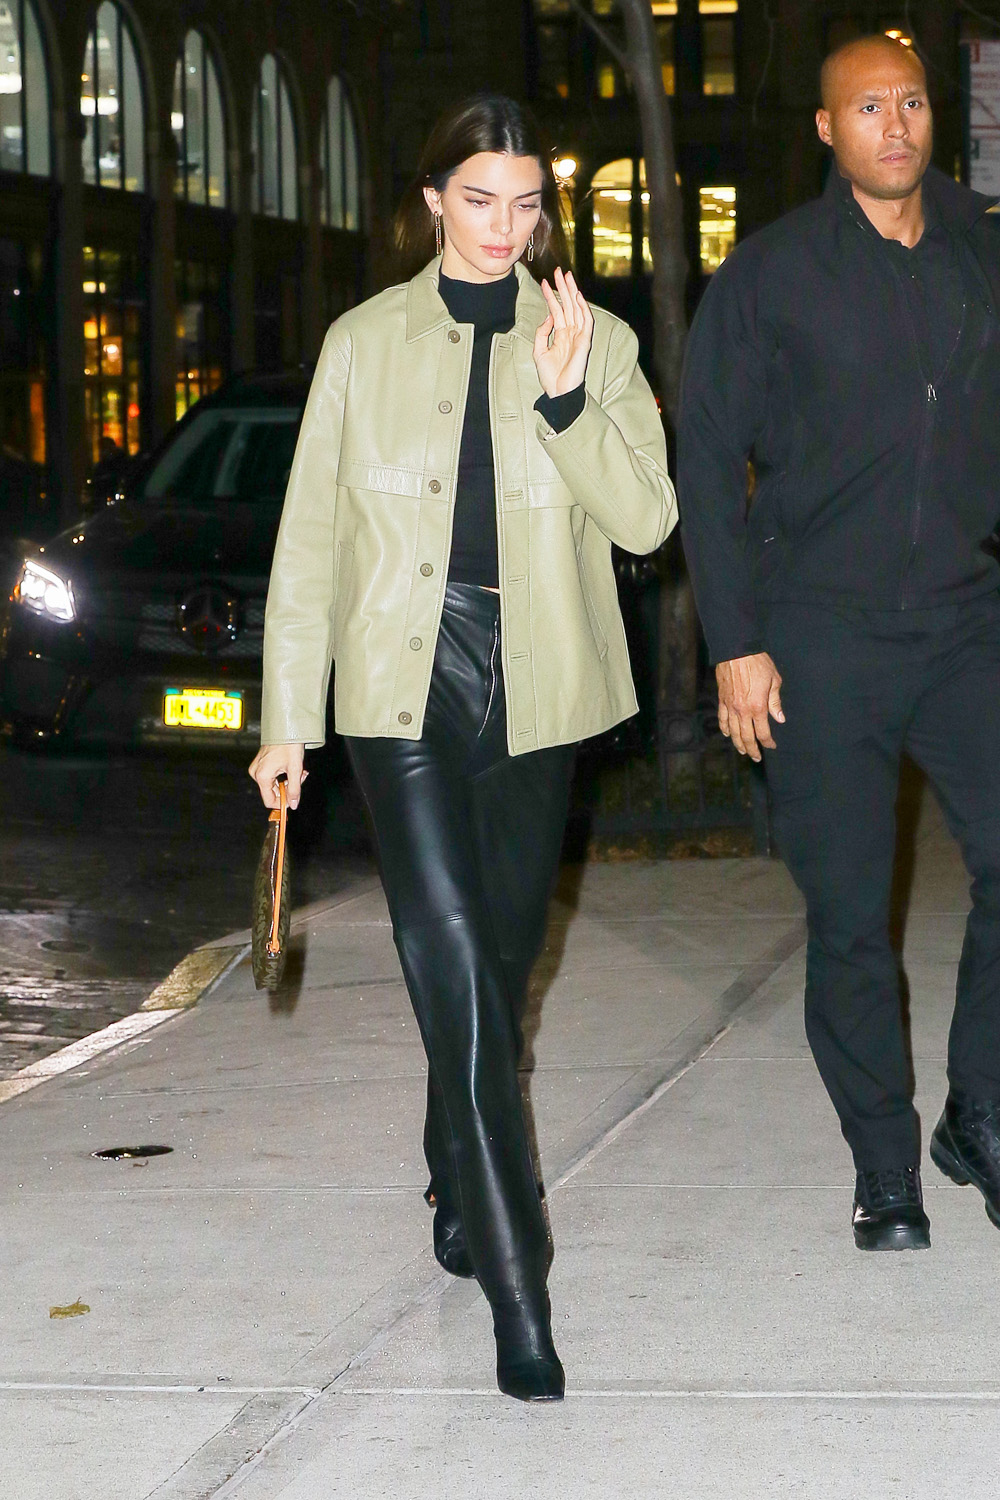 Kendall Jenner Does the Square-Toe Trend at Dinner With Gigi Hadid